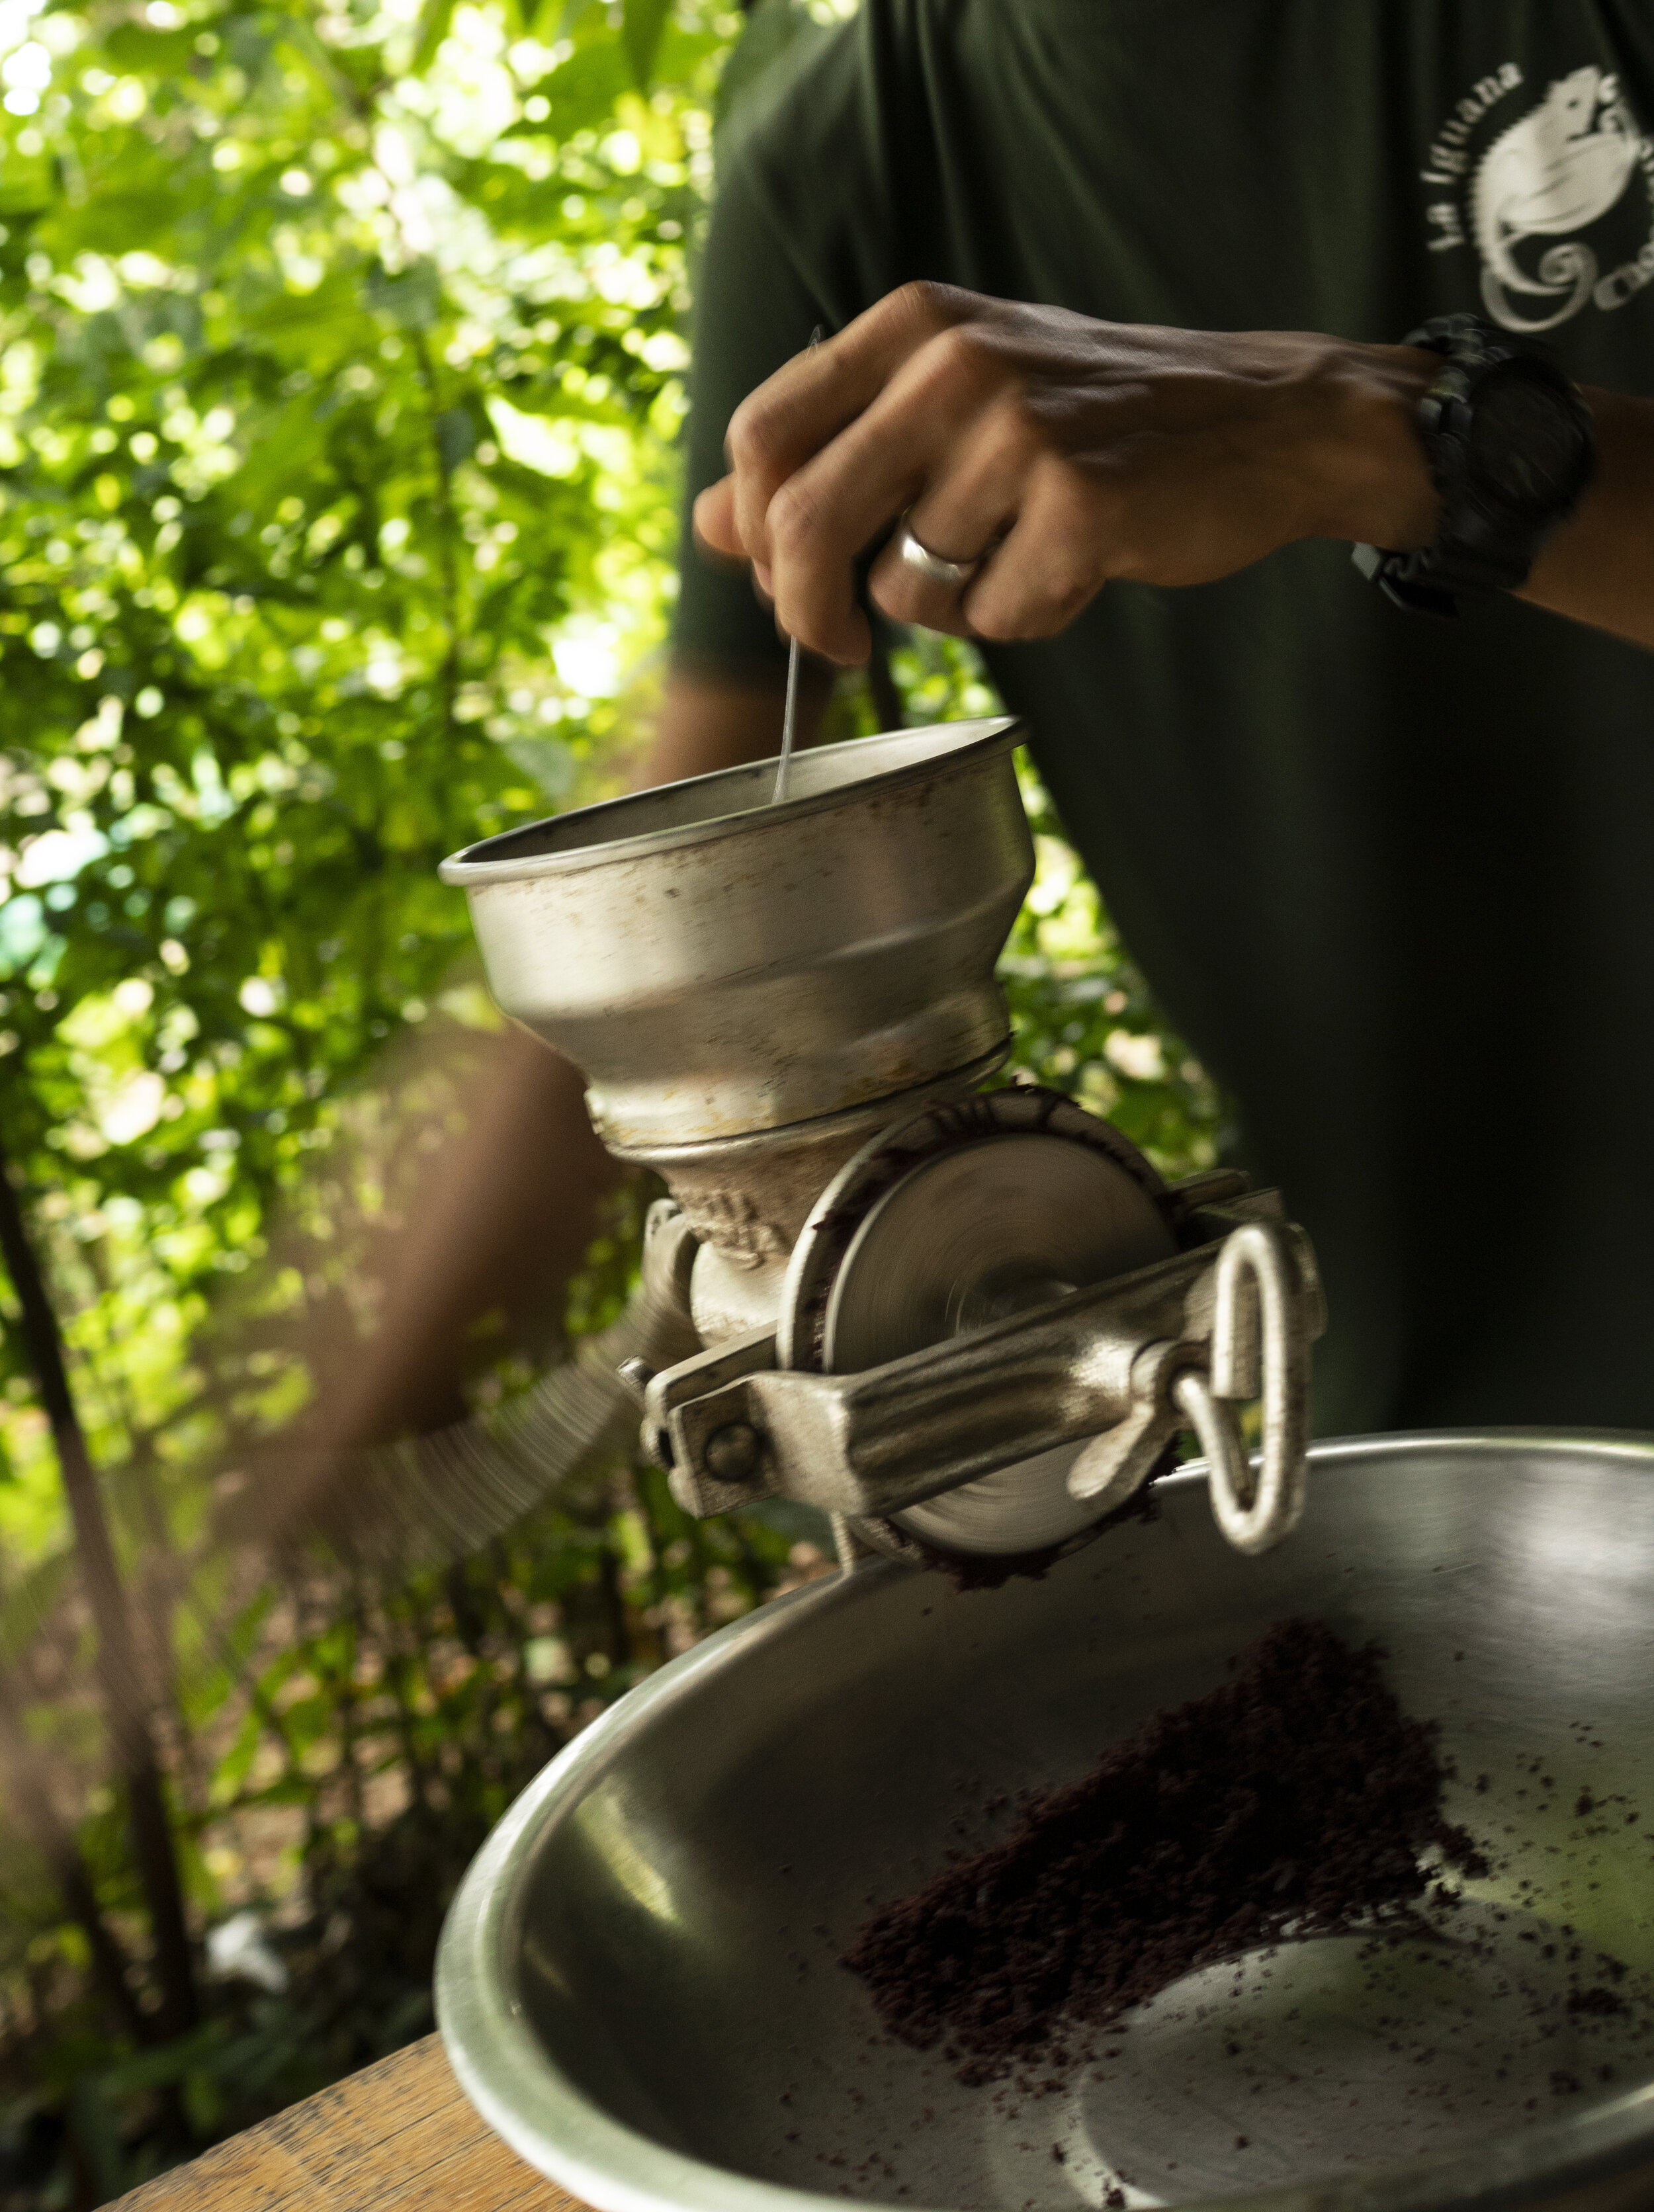 grinding cacao beans.jpg